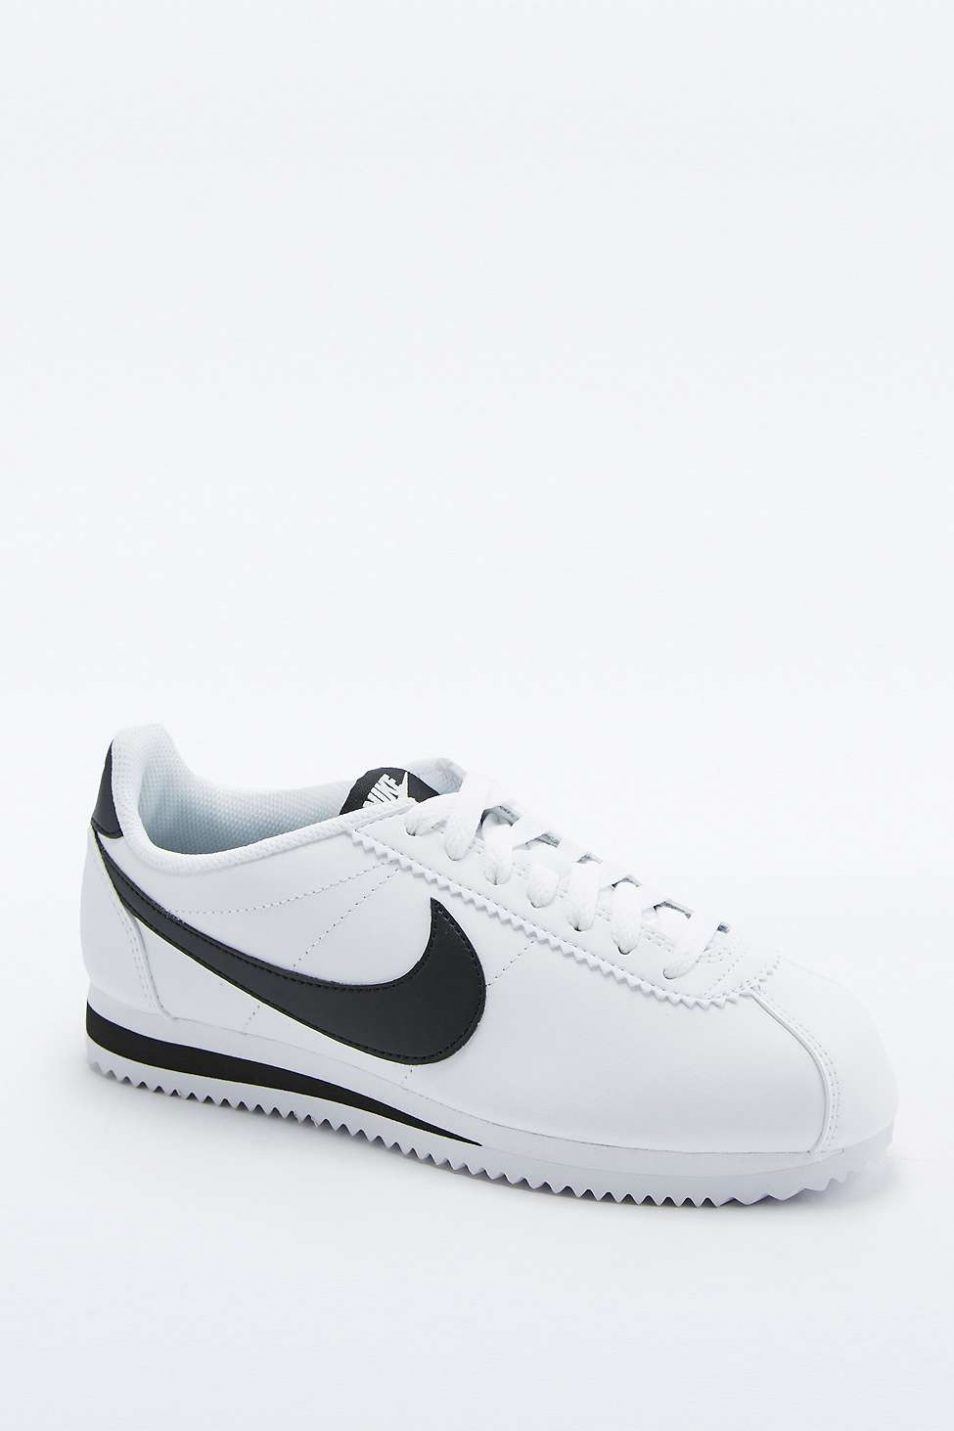 Nike Classic Cortez White Leather Trainers 1